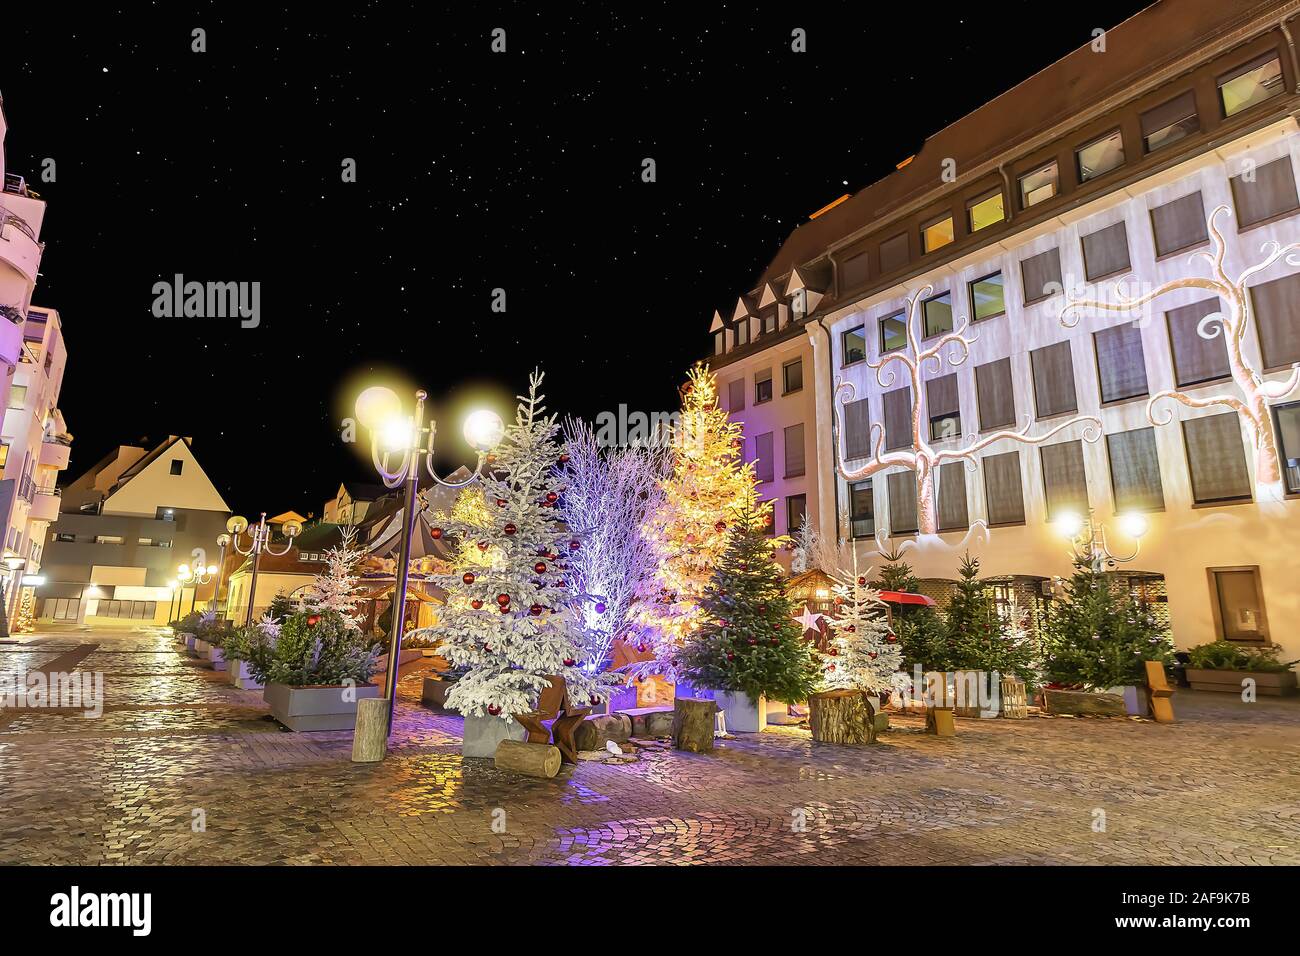 Christmas trees in Colmar, decorated and illuminated at christmas time, Alsace, France Stock Photo